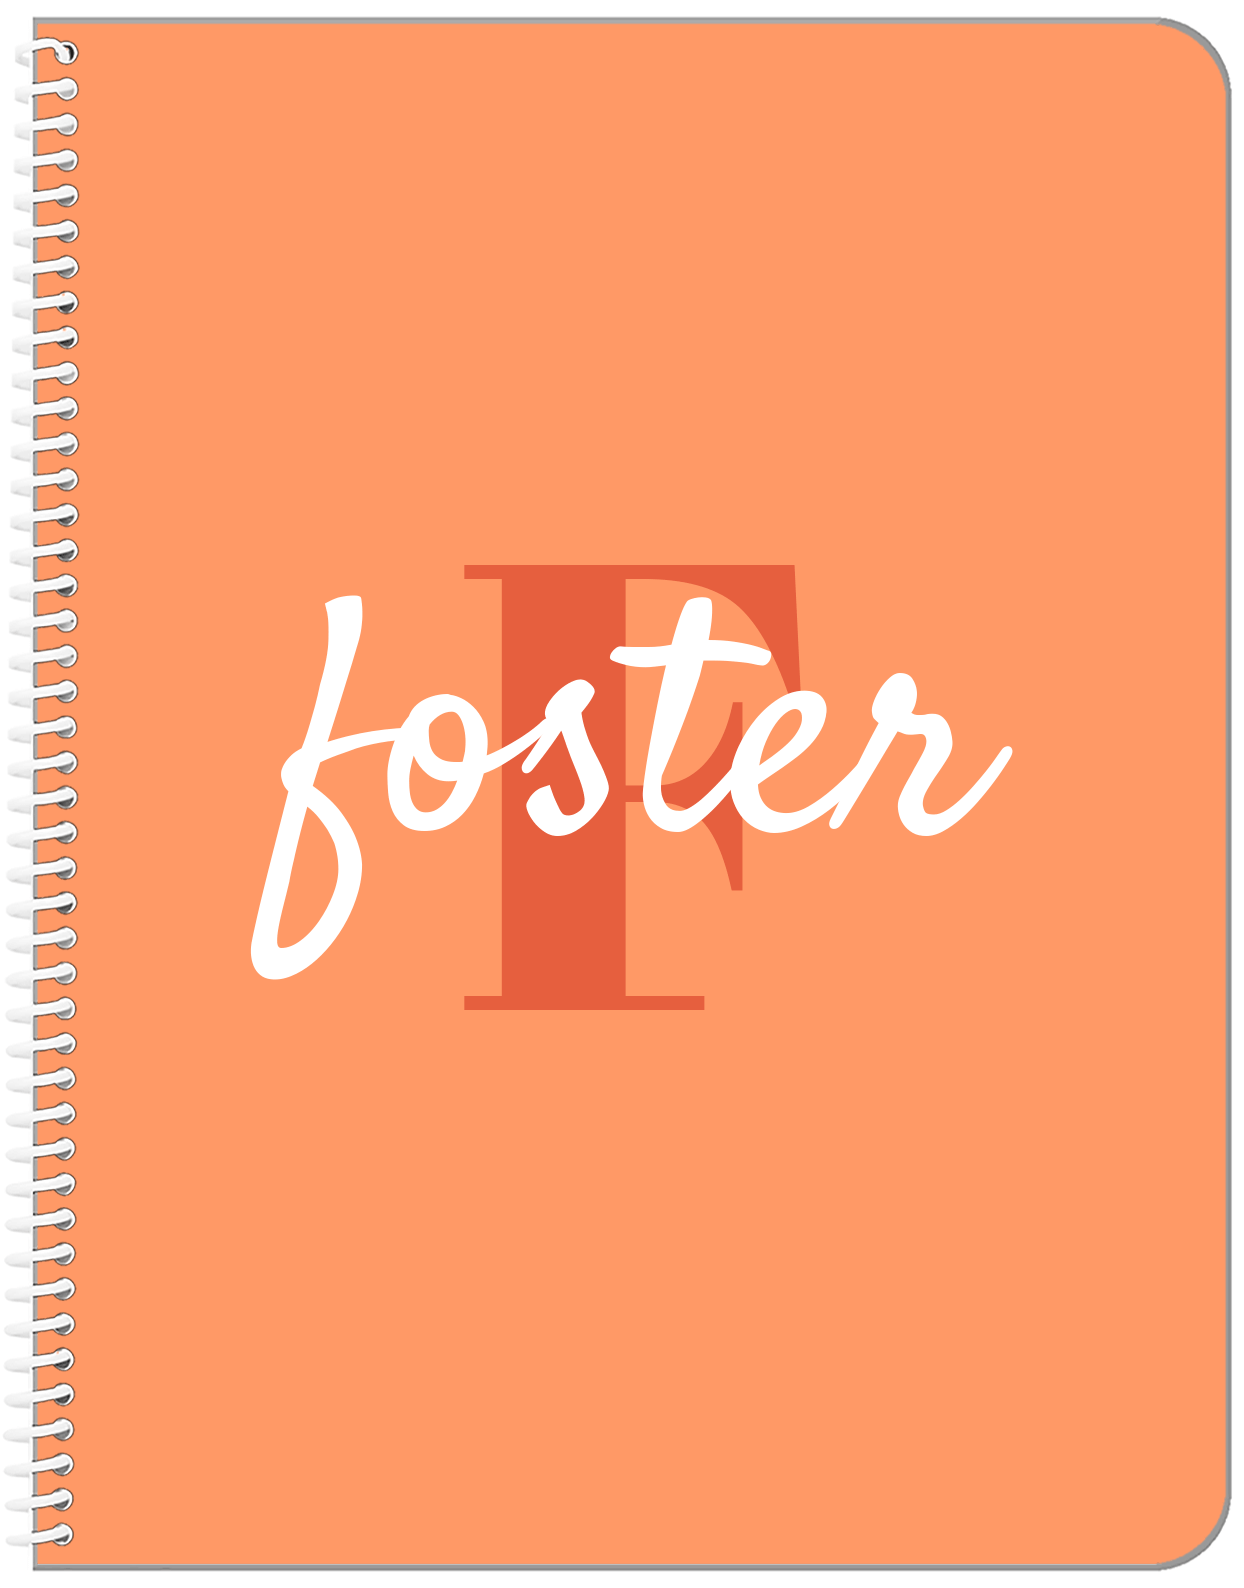 Personalized Solid Color Notebook - Orange Background - Name Over Initial - Front View